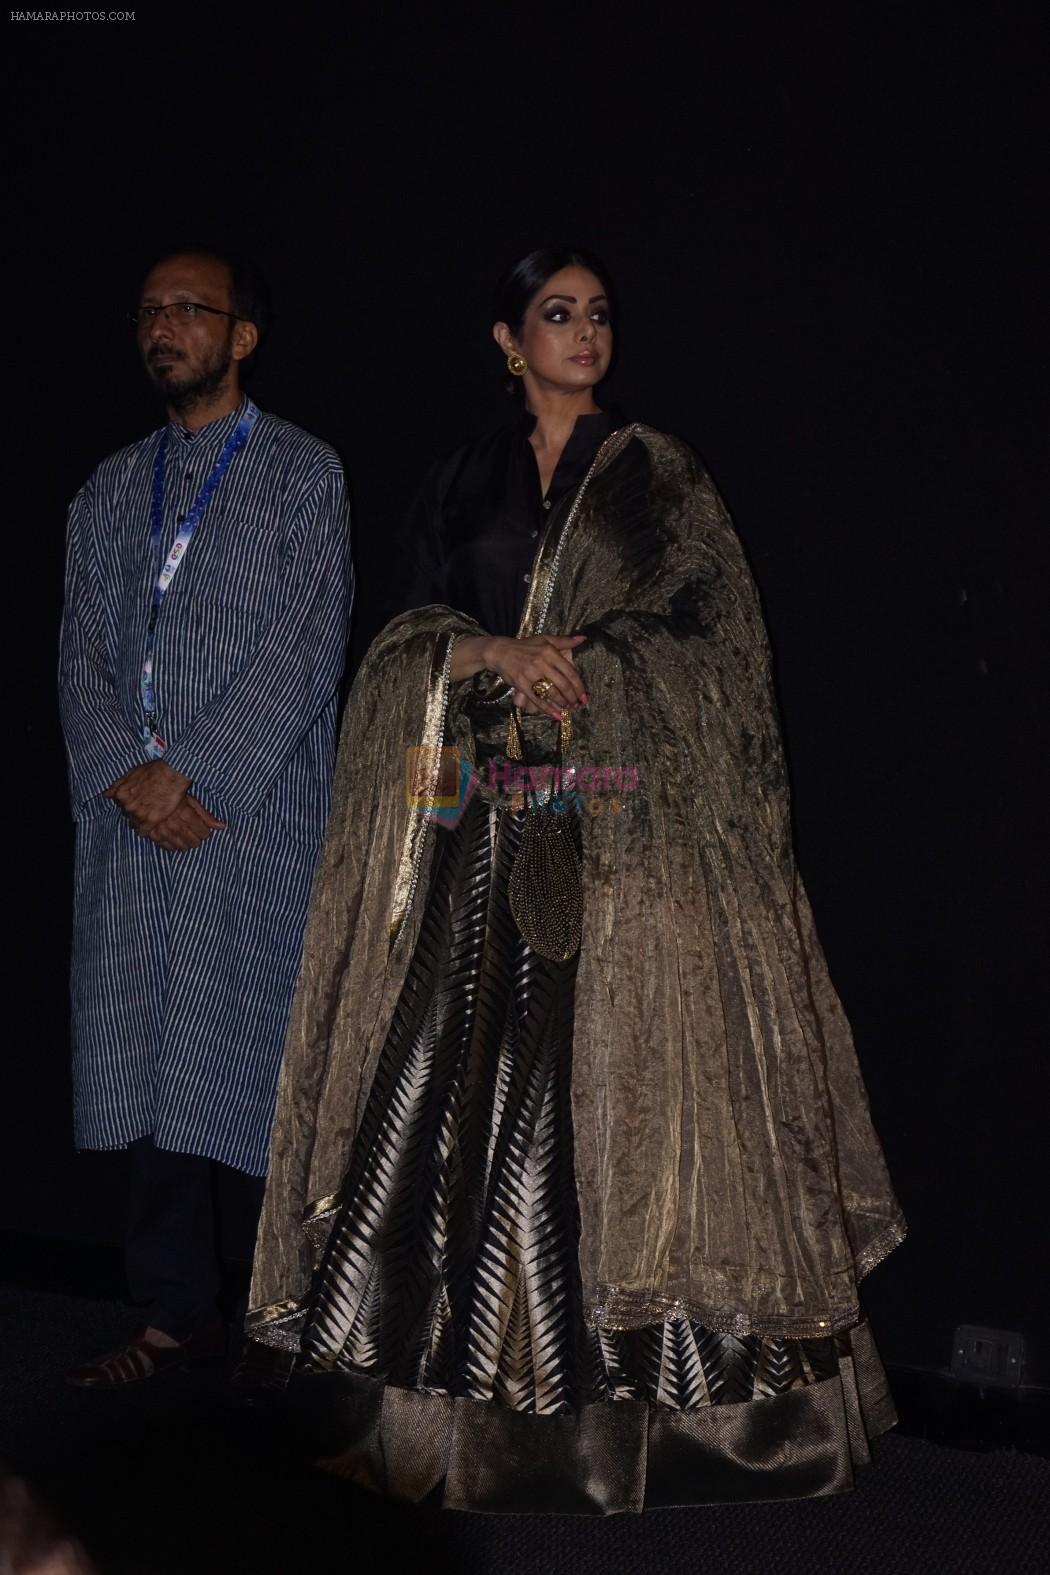 Sridevi at the Inauguration Of Indian Panorama at IFFI 2017 on 20th Nov 2017